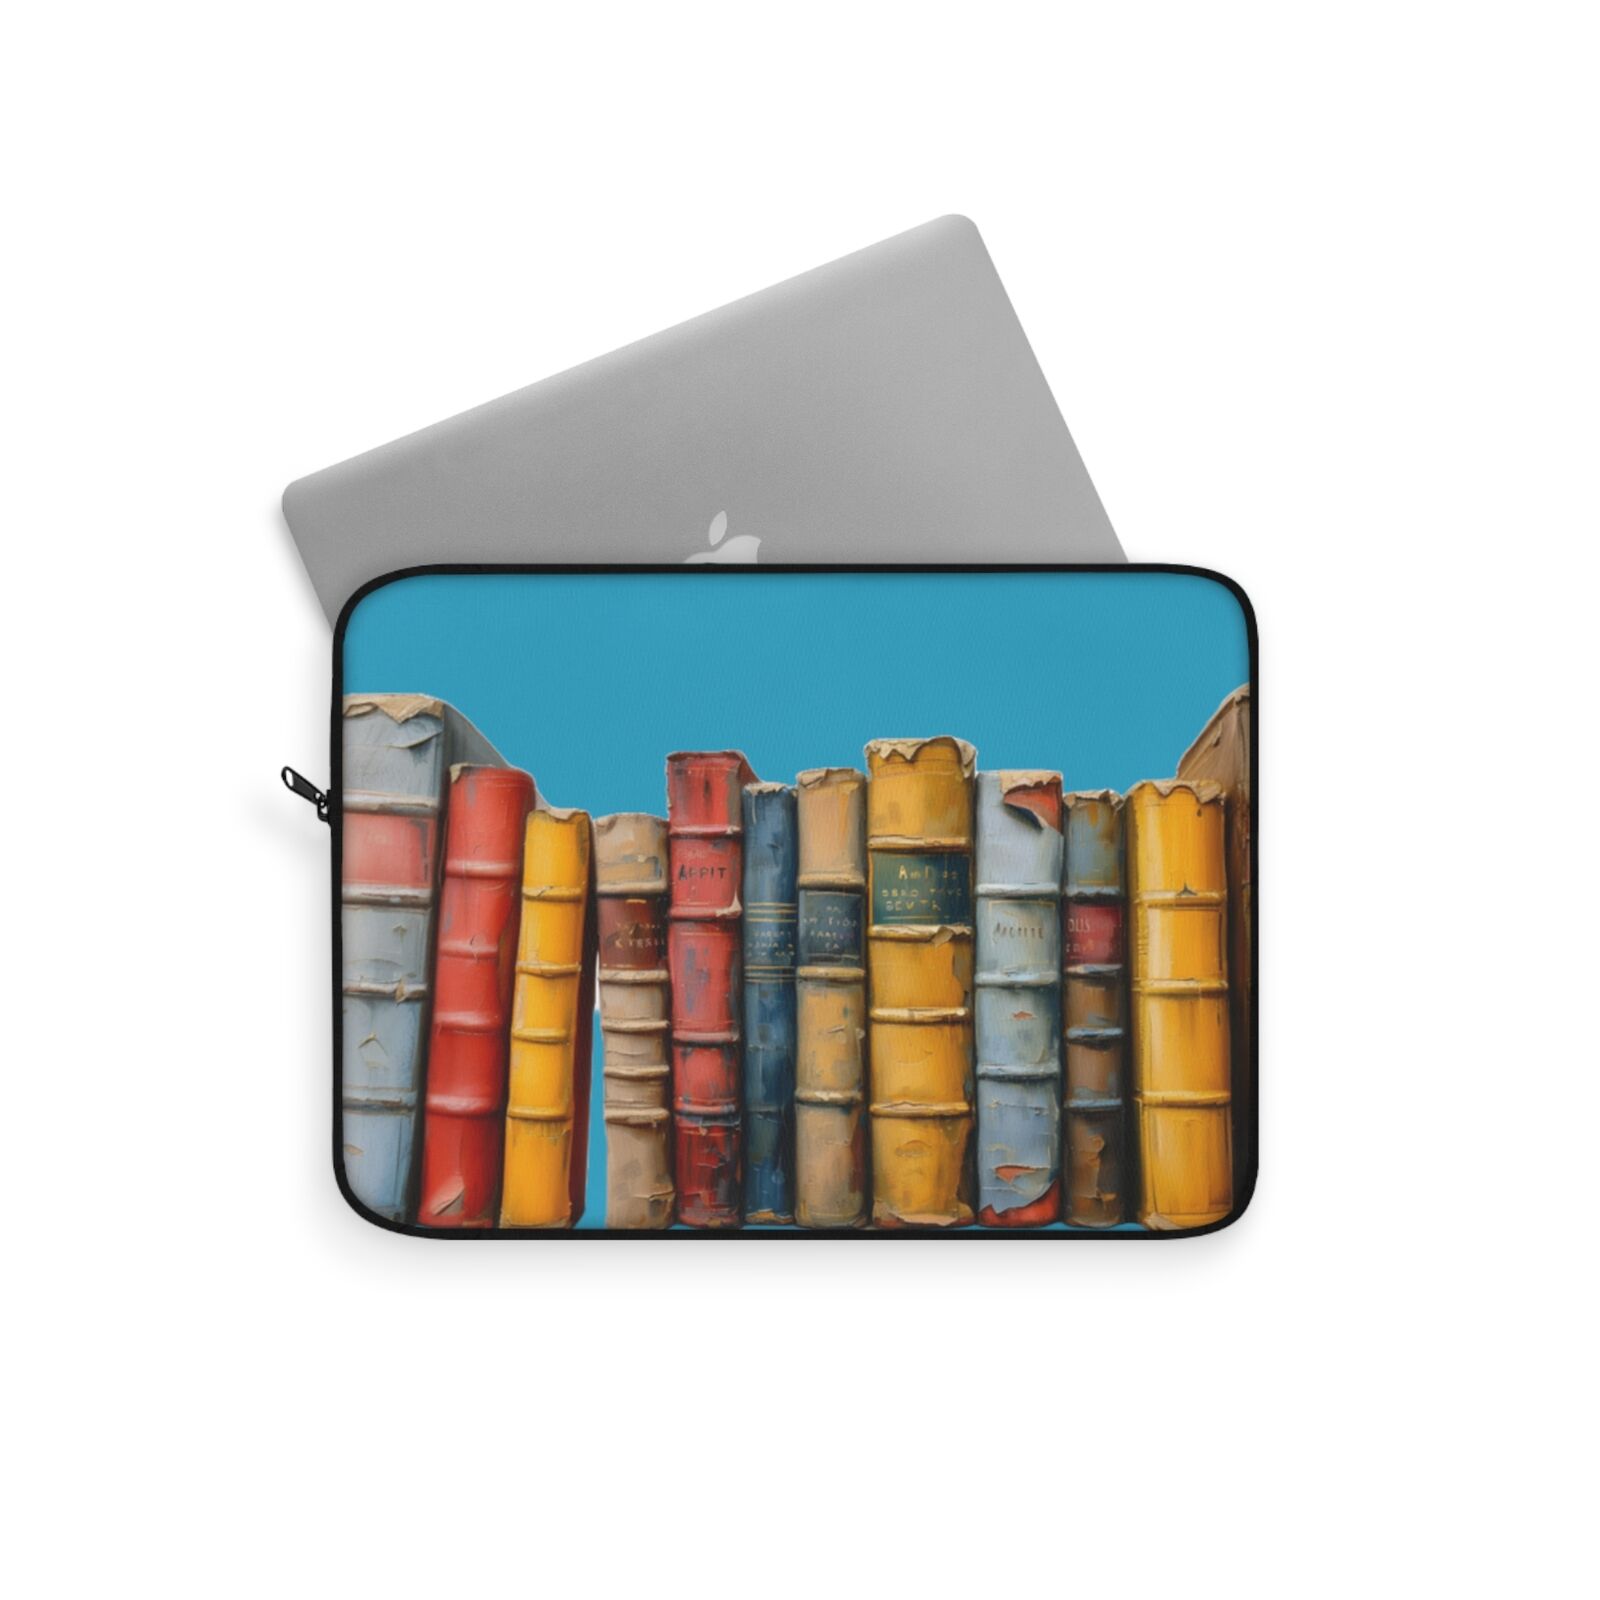 Vintage Books Laptop Sleeve in Turquoise